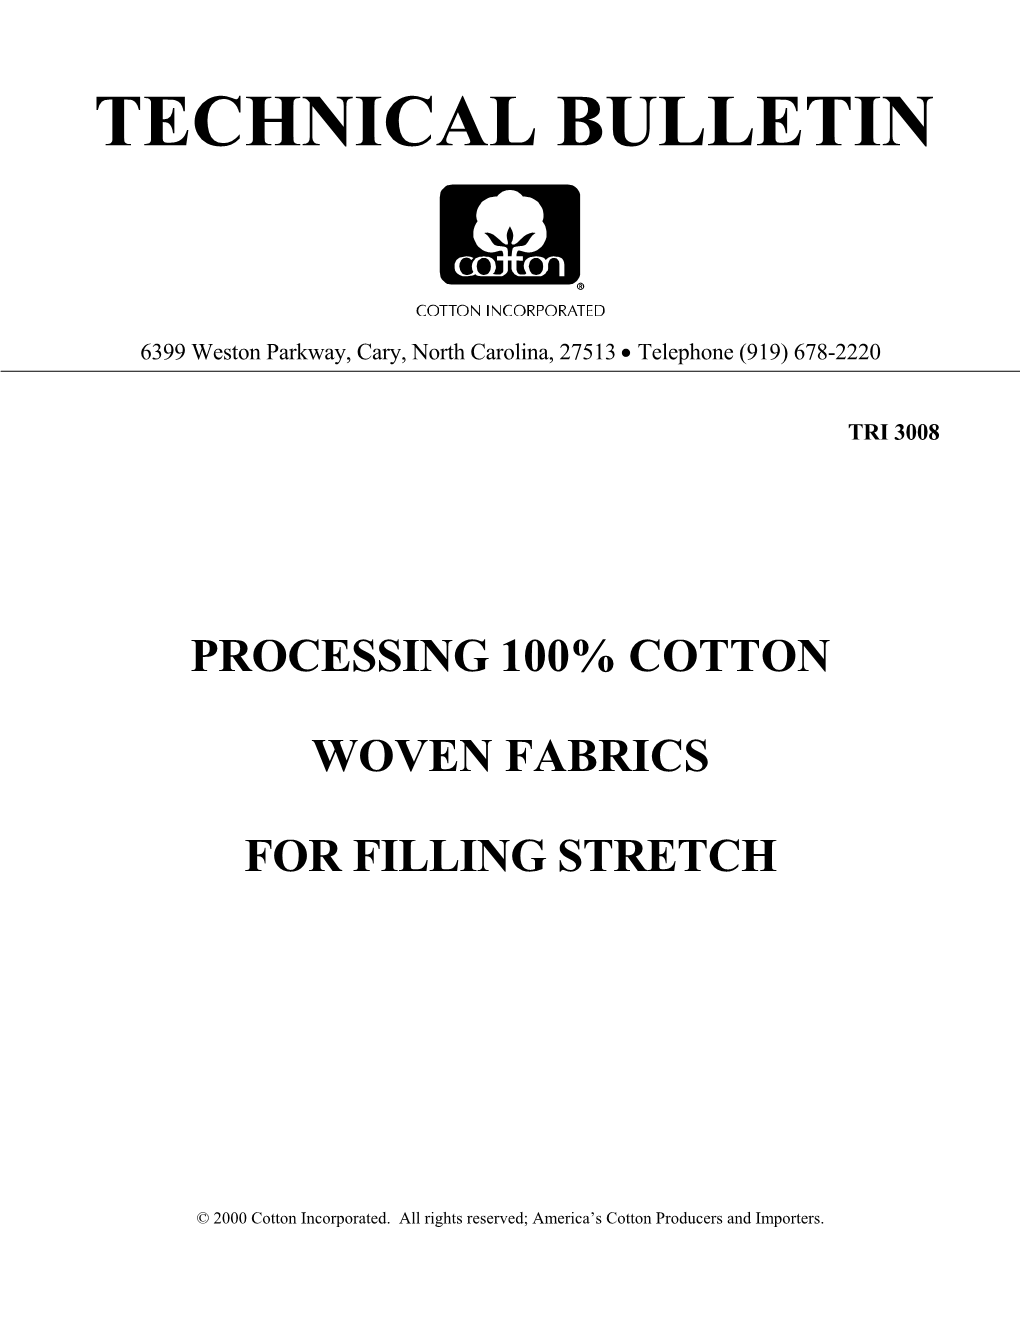 Processing 100% Cotton Woven Fabrics for Filling